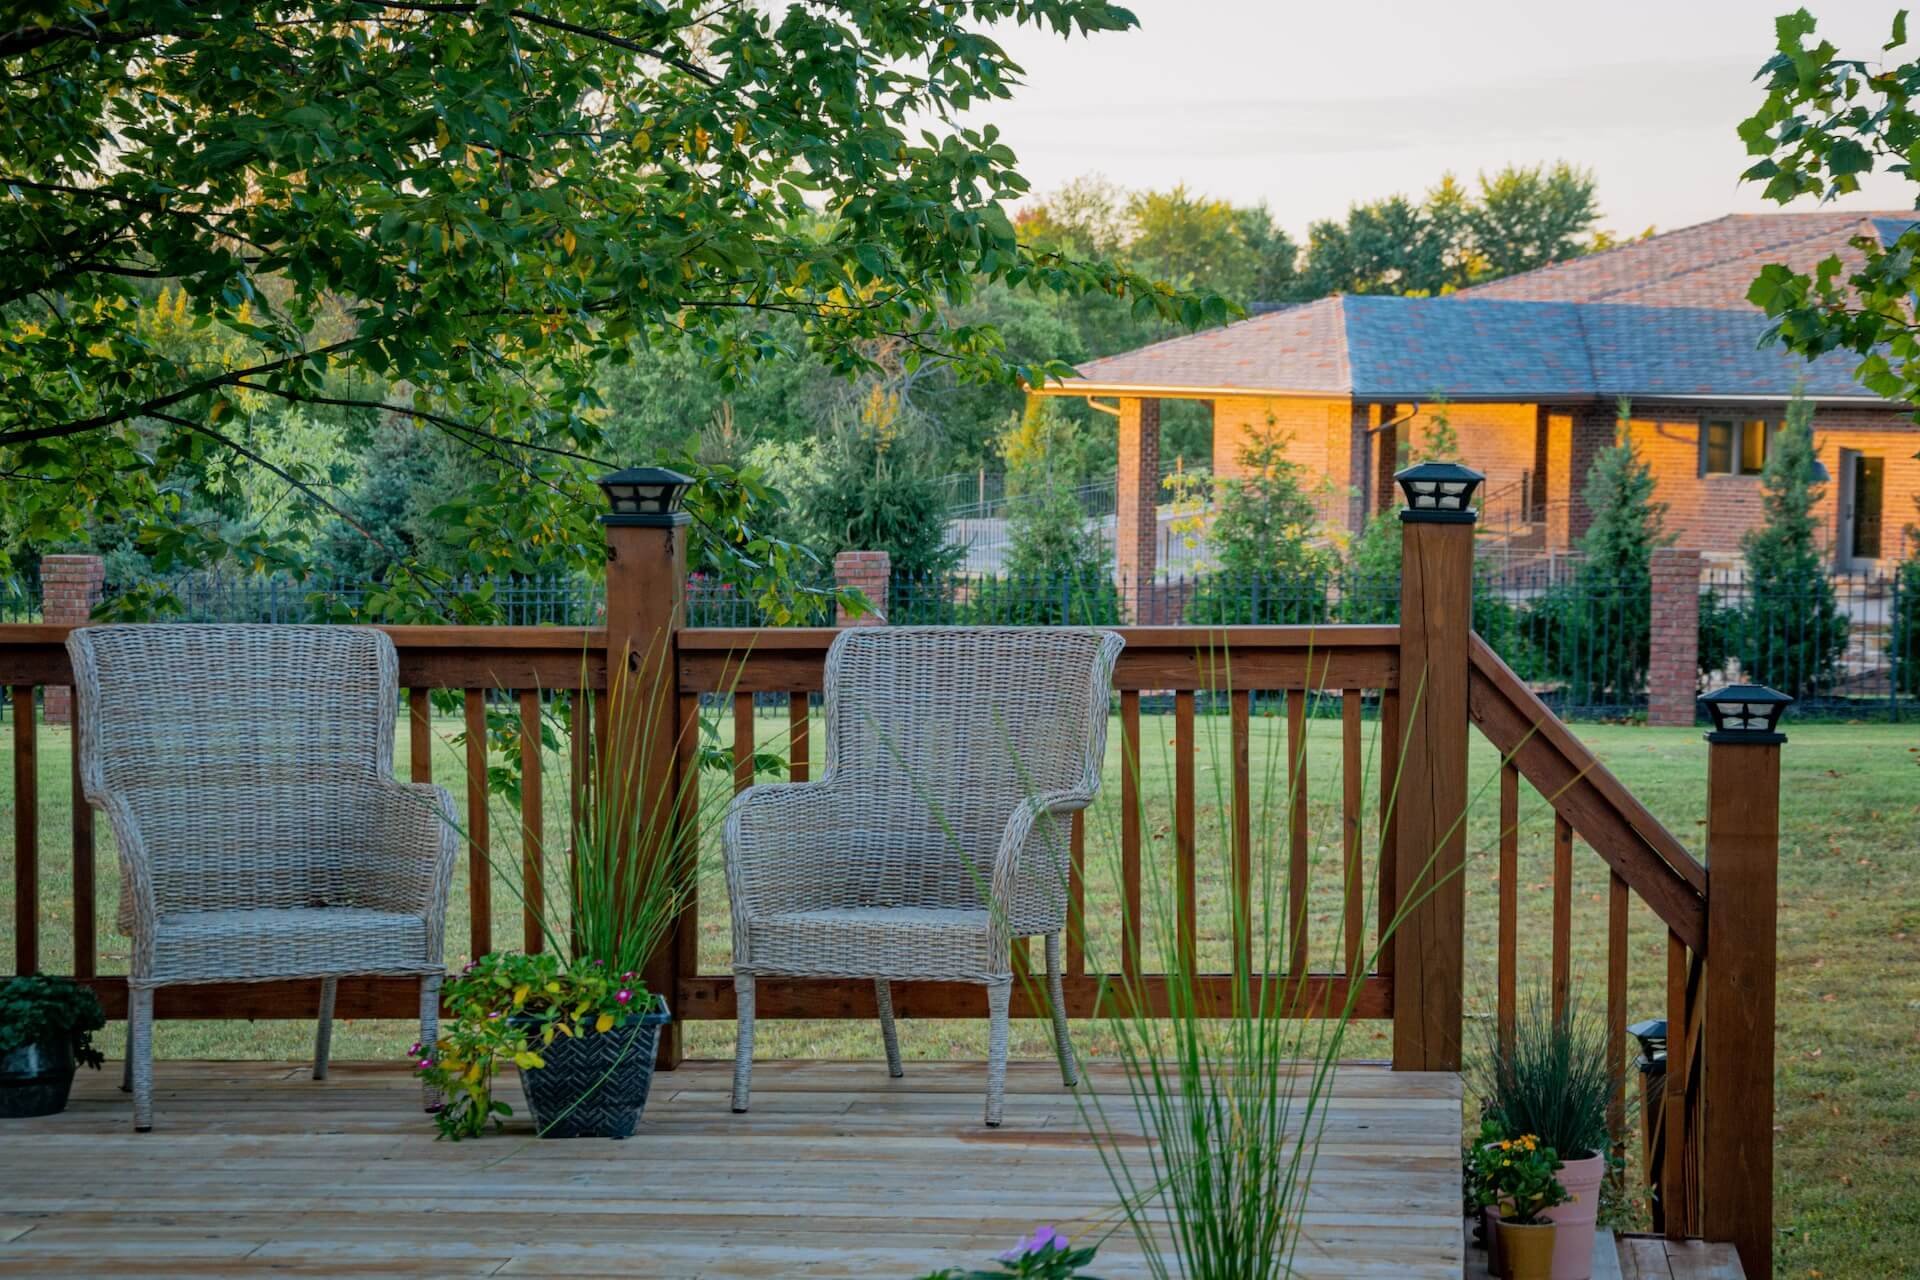 Deck Railing Ideas: Complete Your Outdoor Space